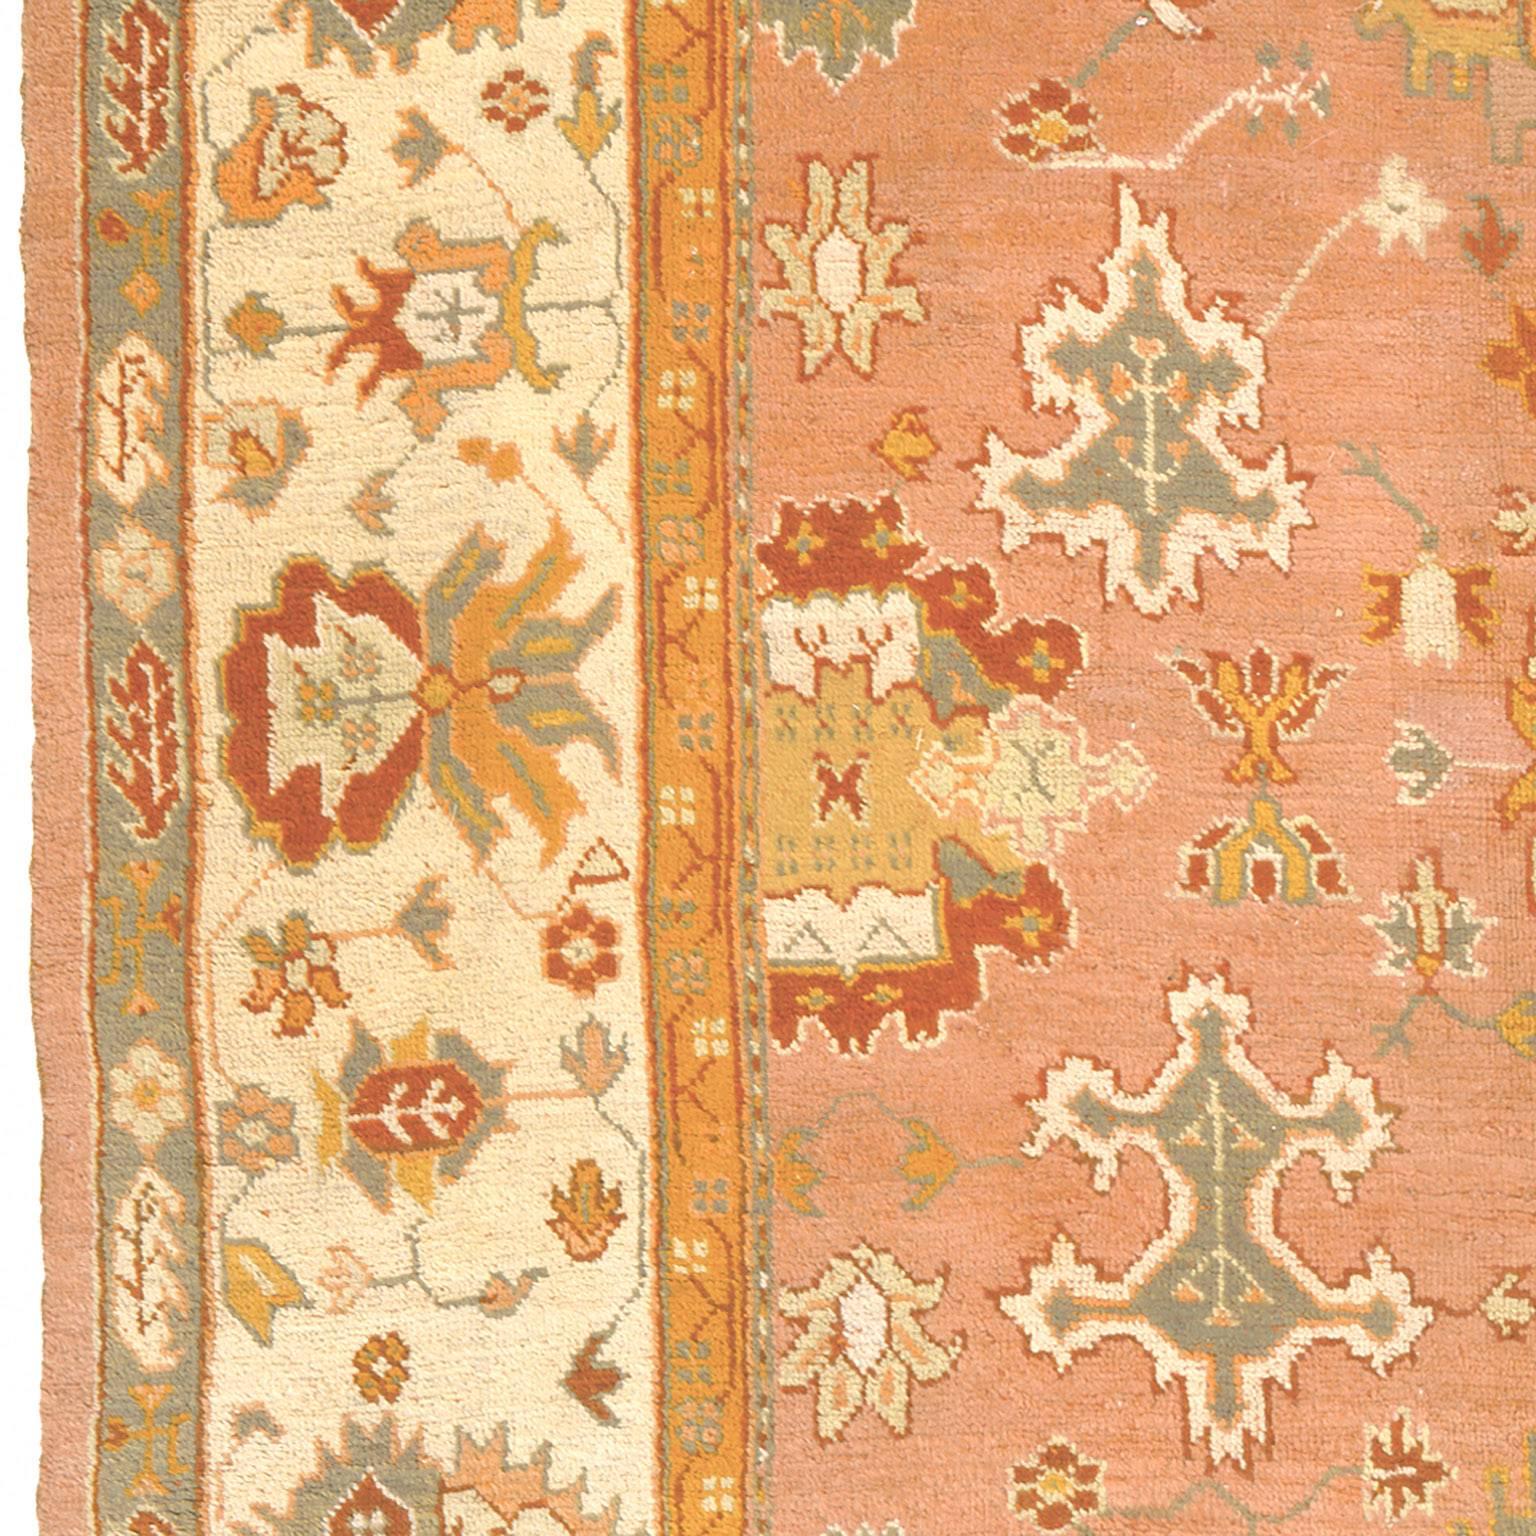 Late 19th Century Turkish Oushak Rug In Good Condition For Sale In New York, NY